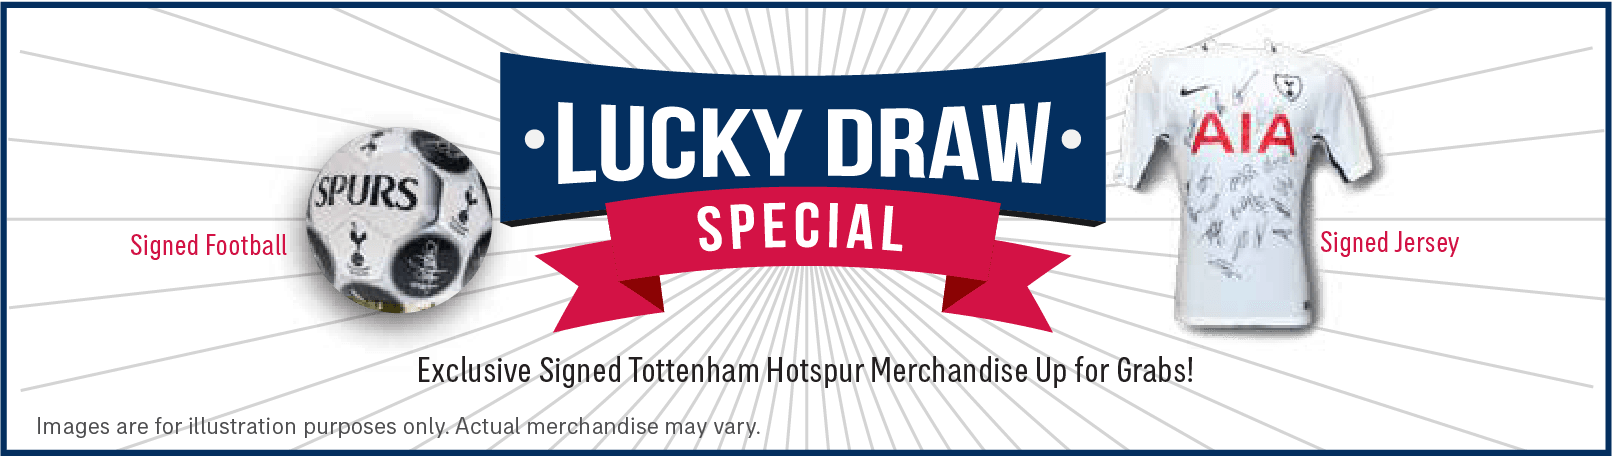 Lucky draw special